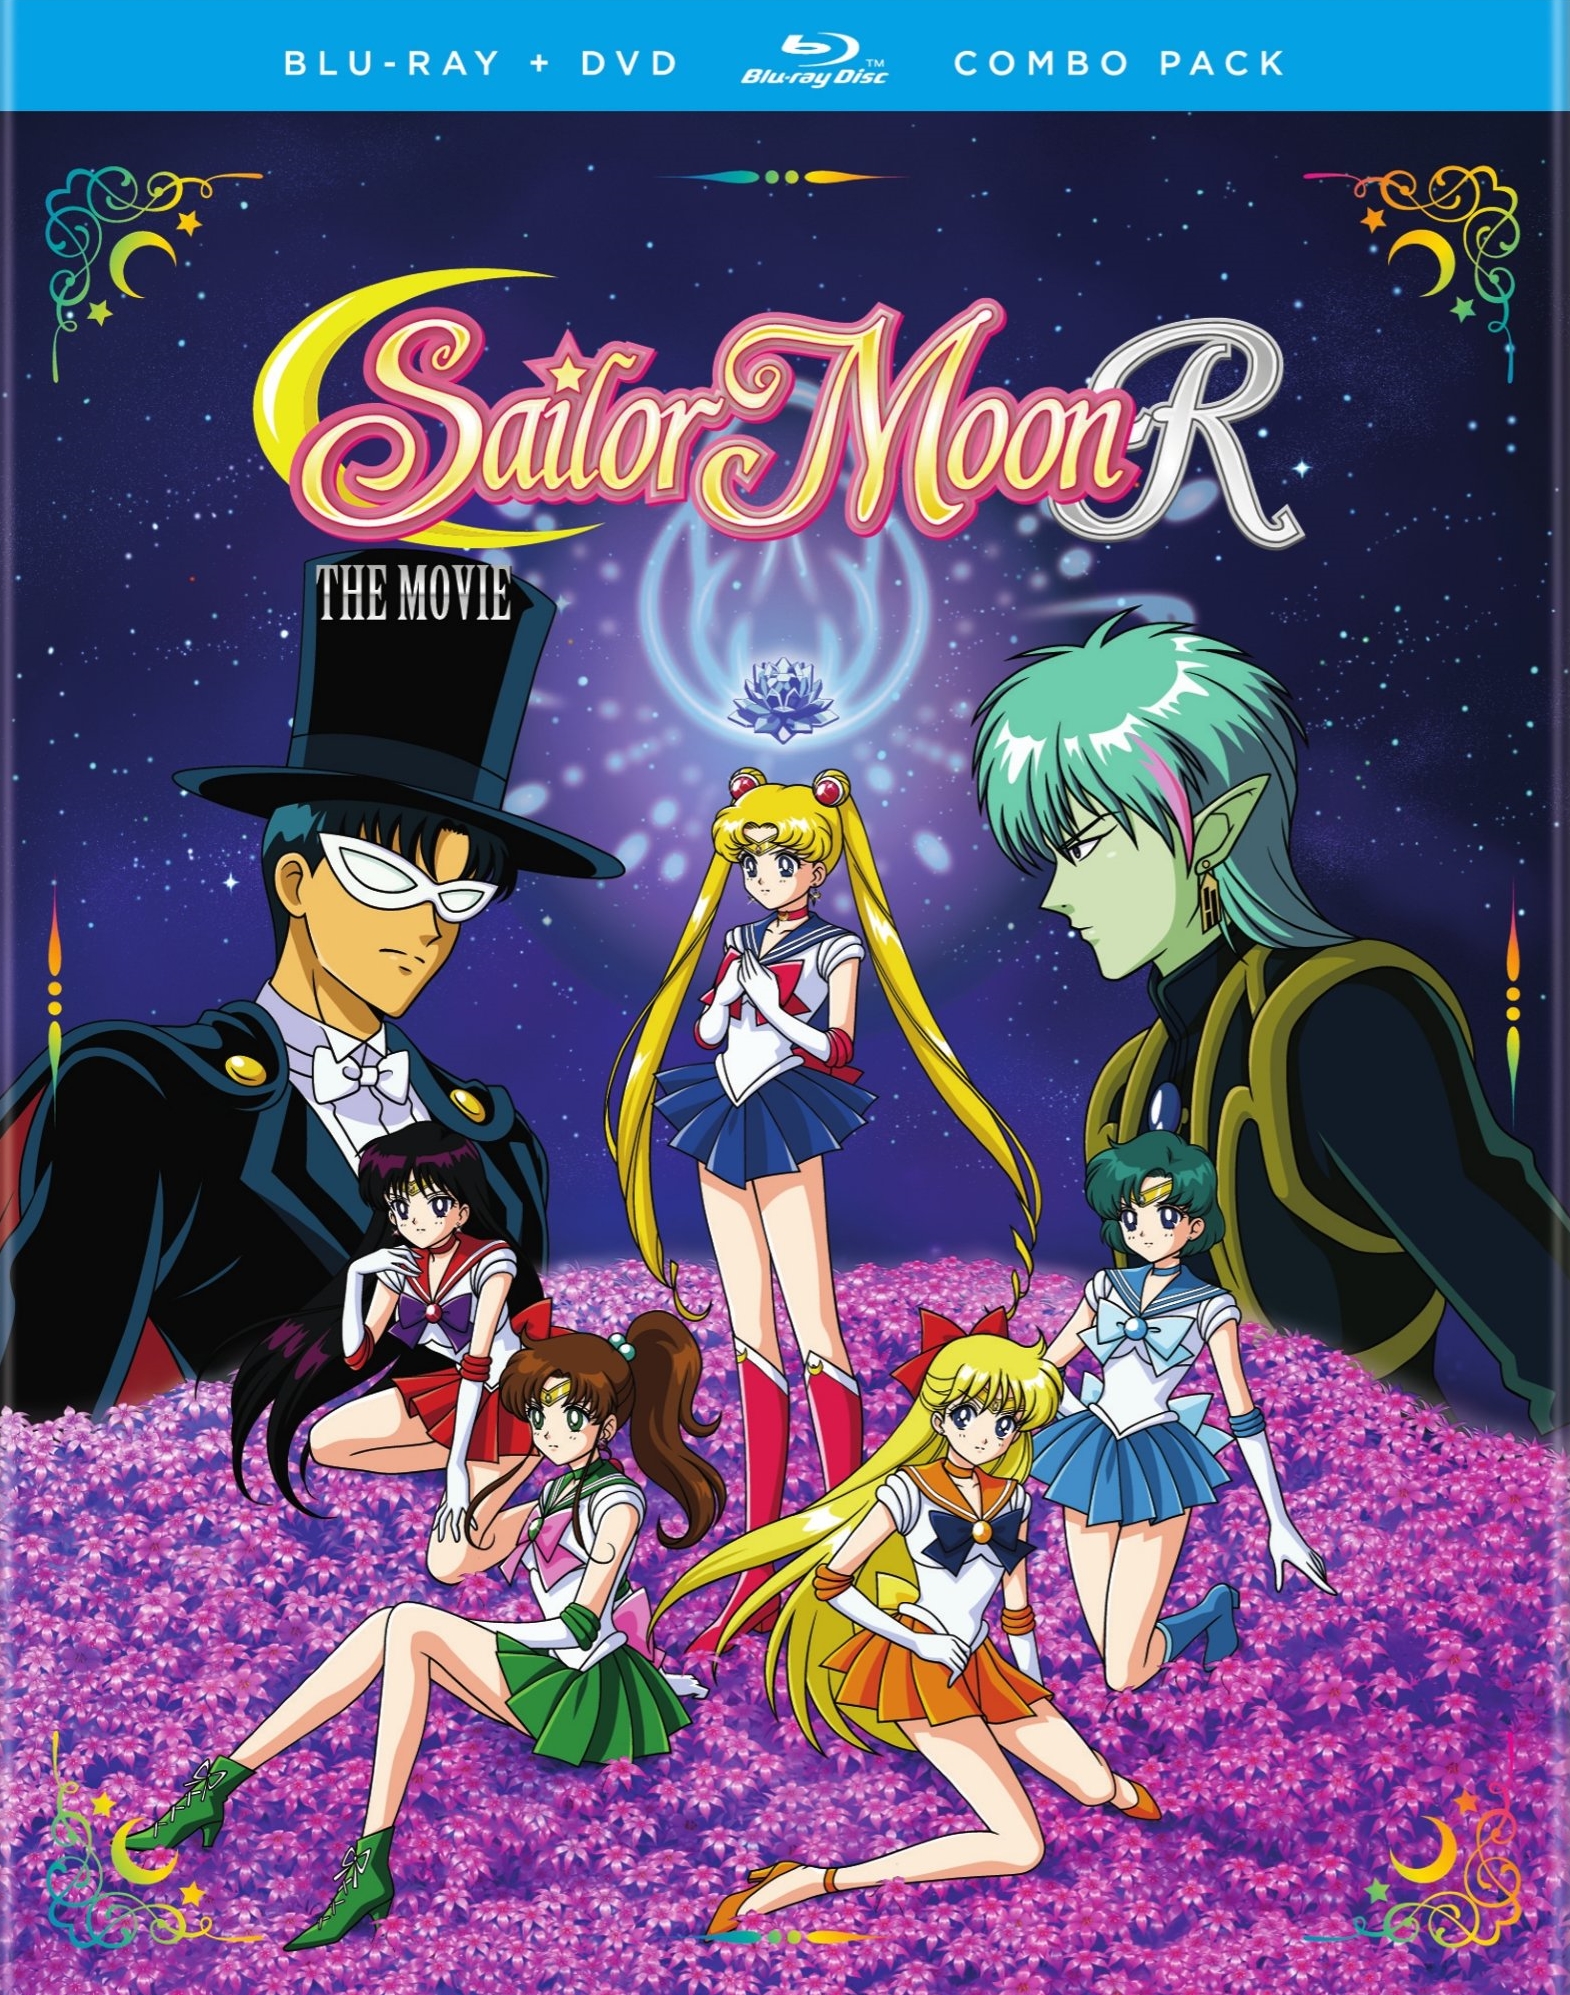 Sailor Moon SuperS: The Complete Fourth Season (Blu-ray)